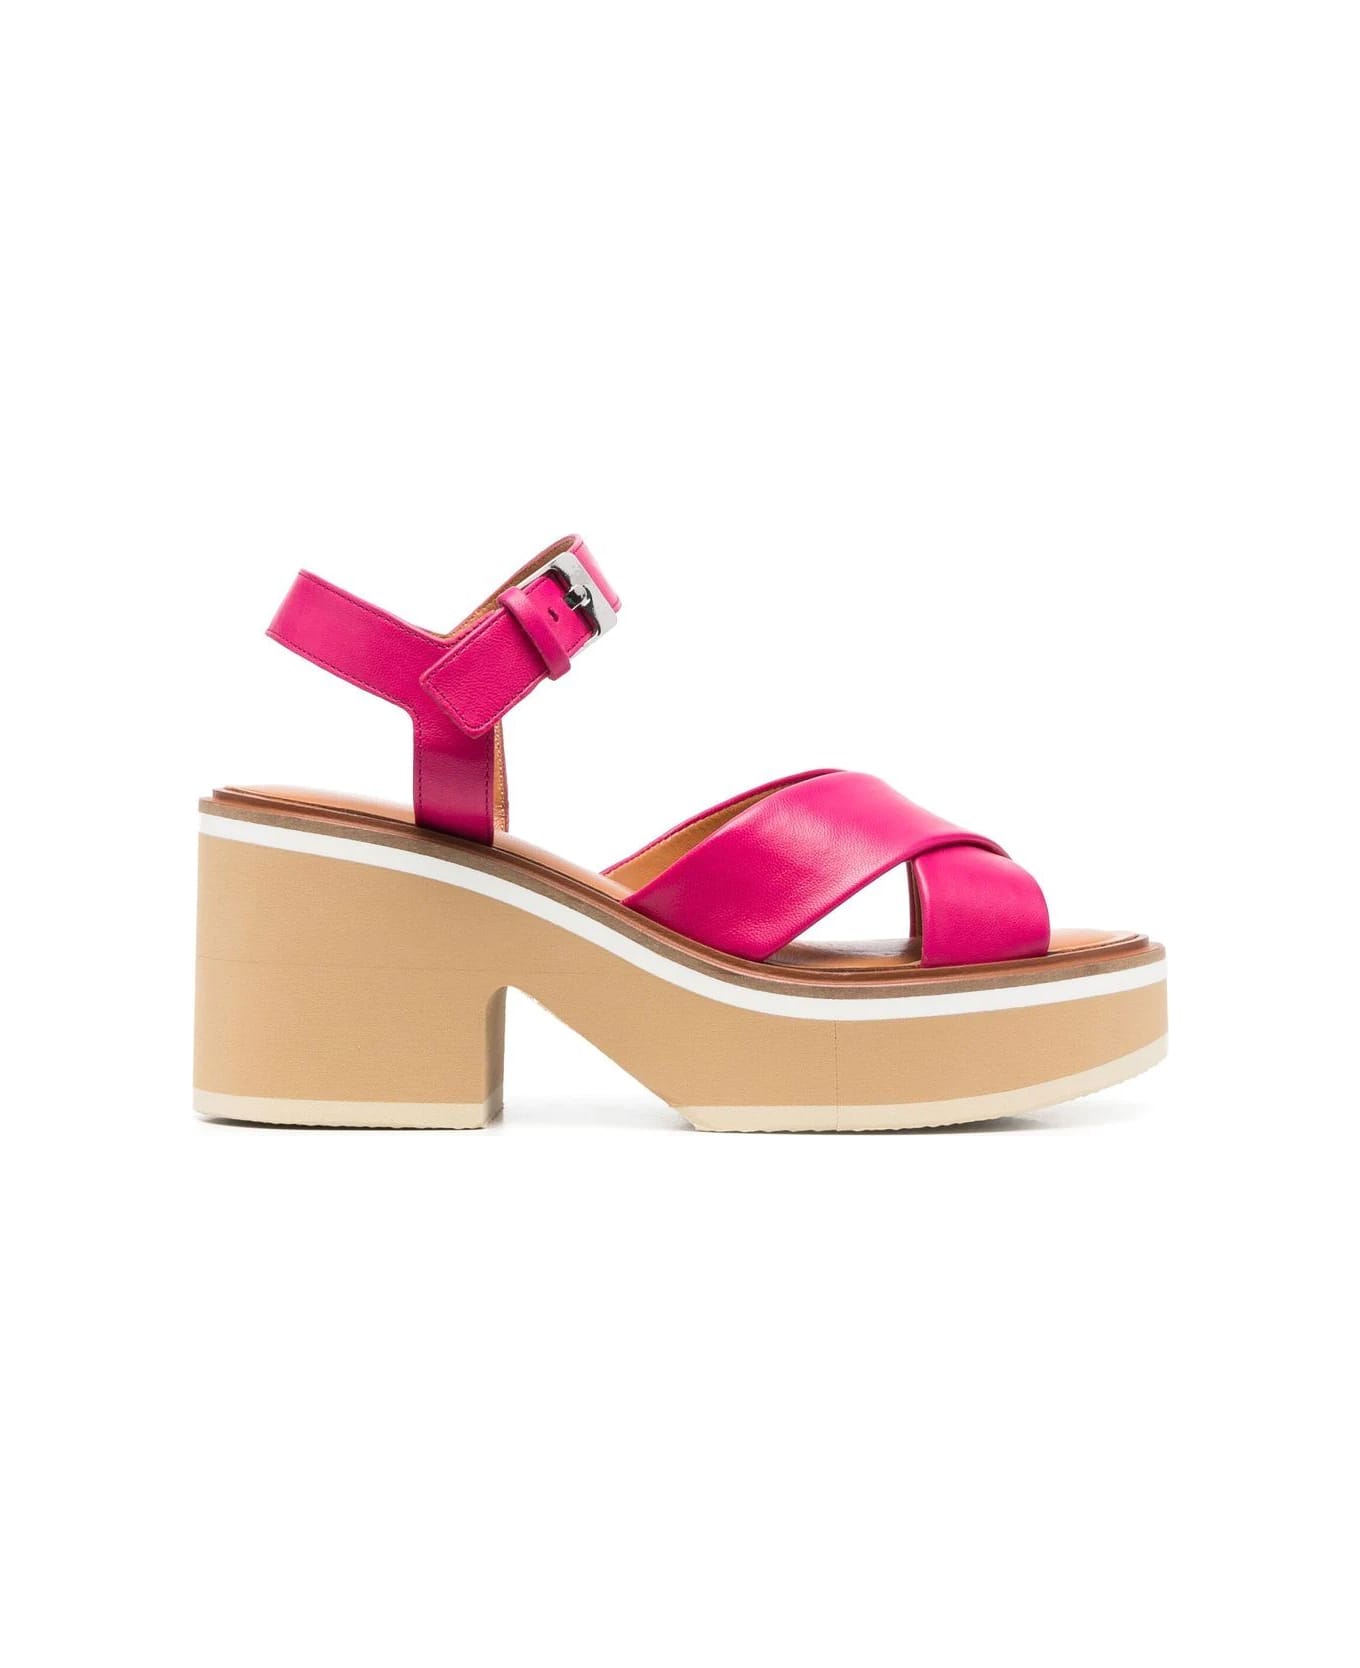 Clergerie Charline9 Criss Cross Sandal With Closure At The Ankles - Hibis Nap